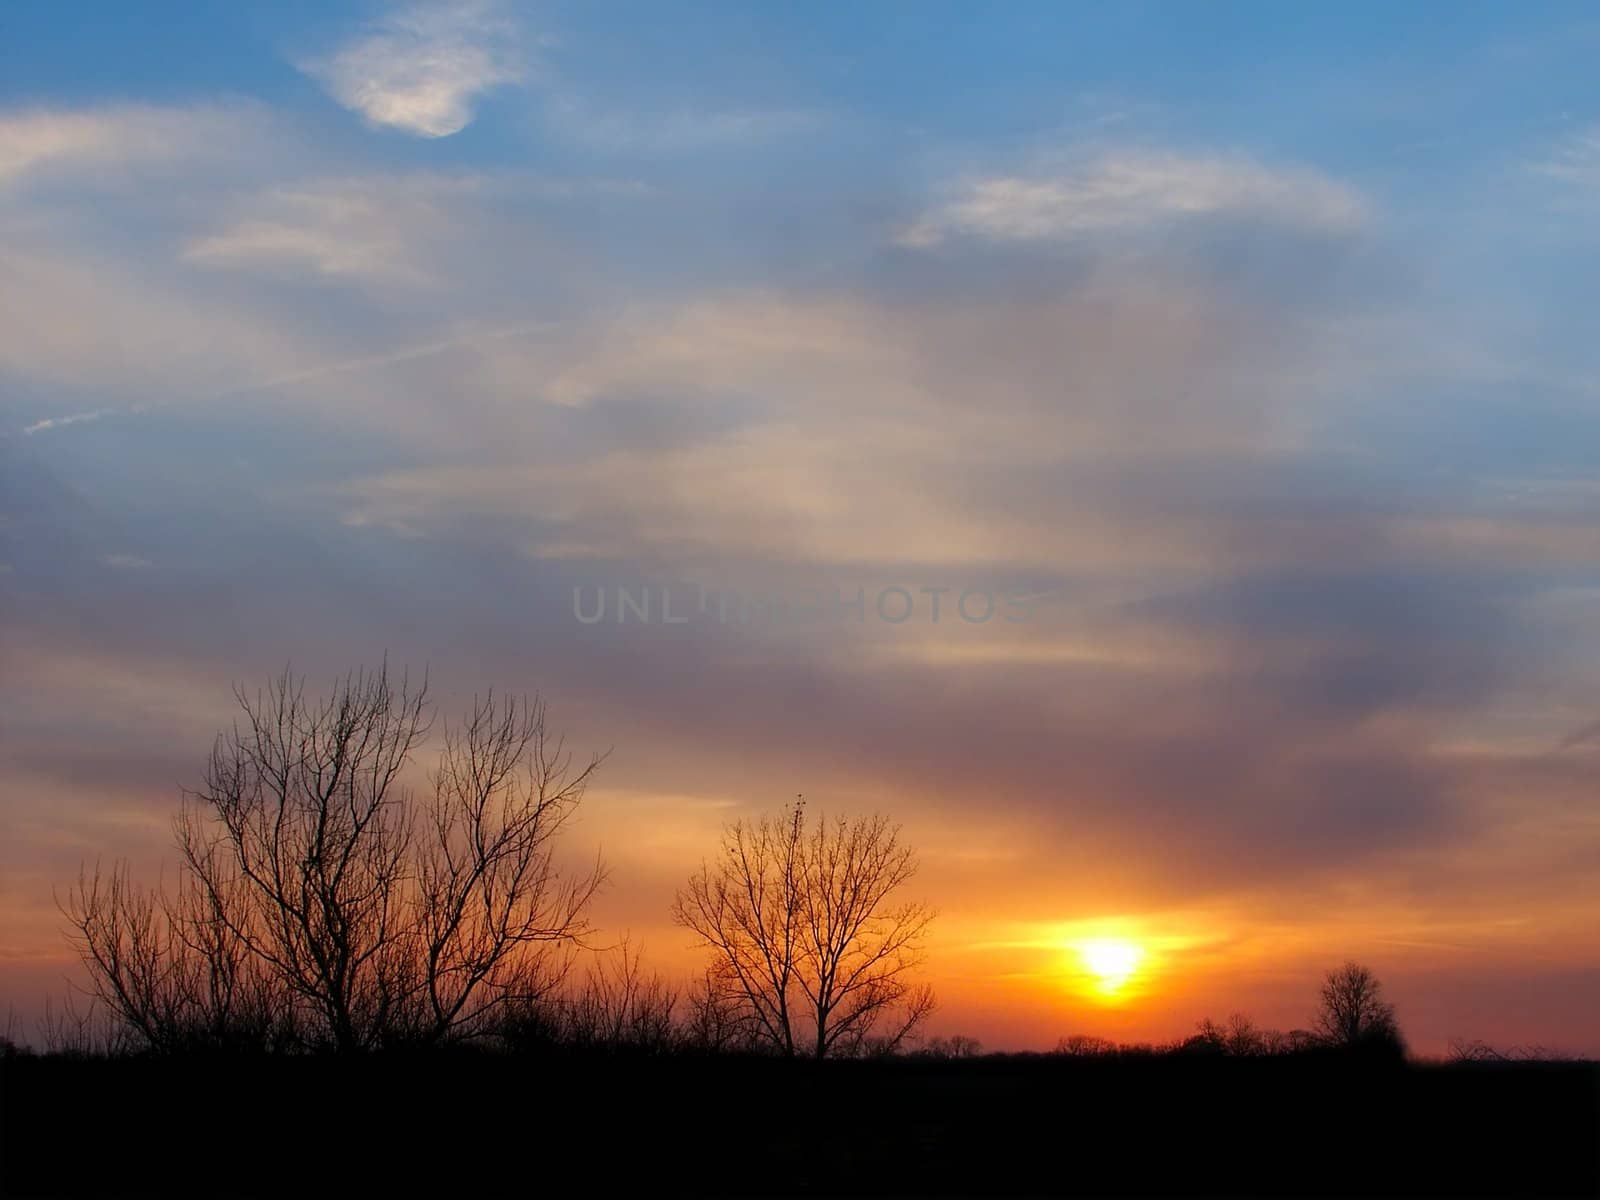 Sunset in northern Illinois by Wirepec